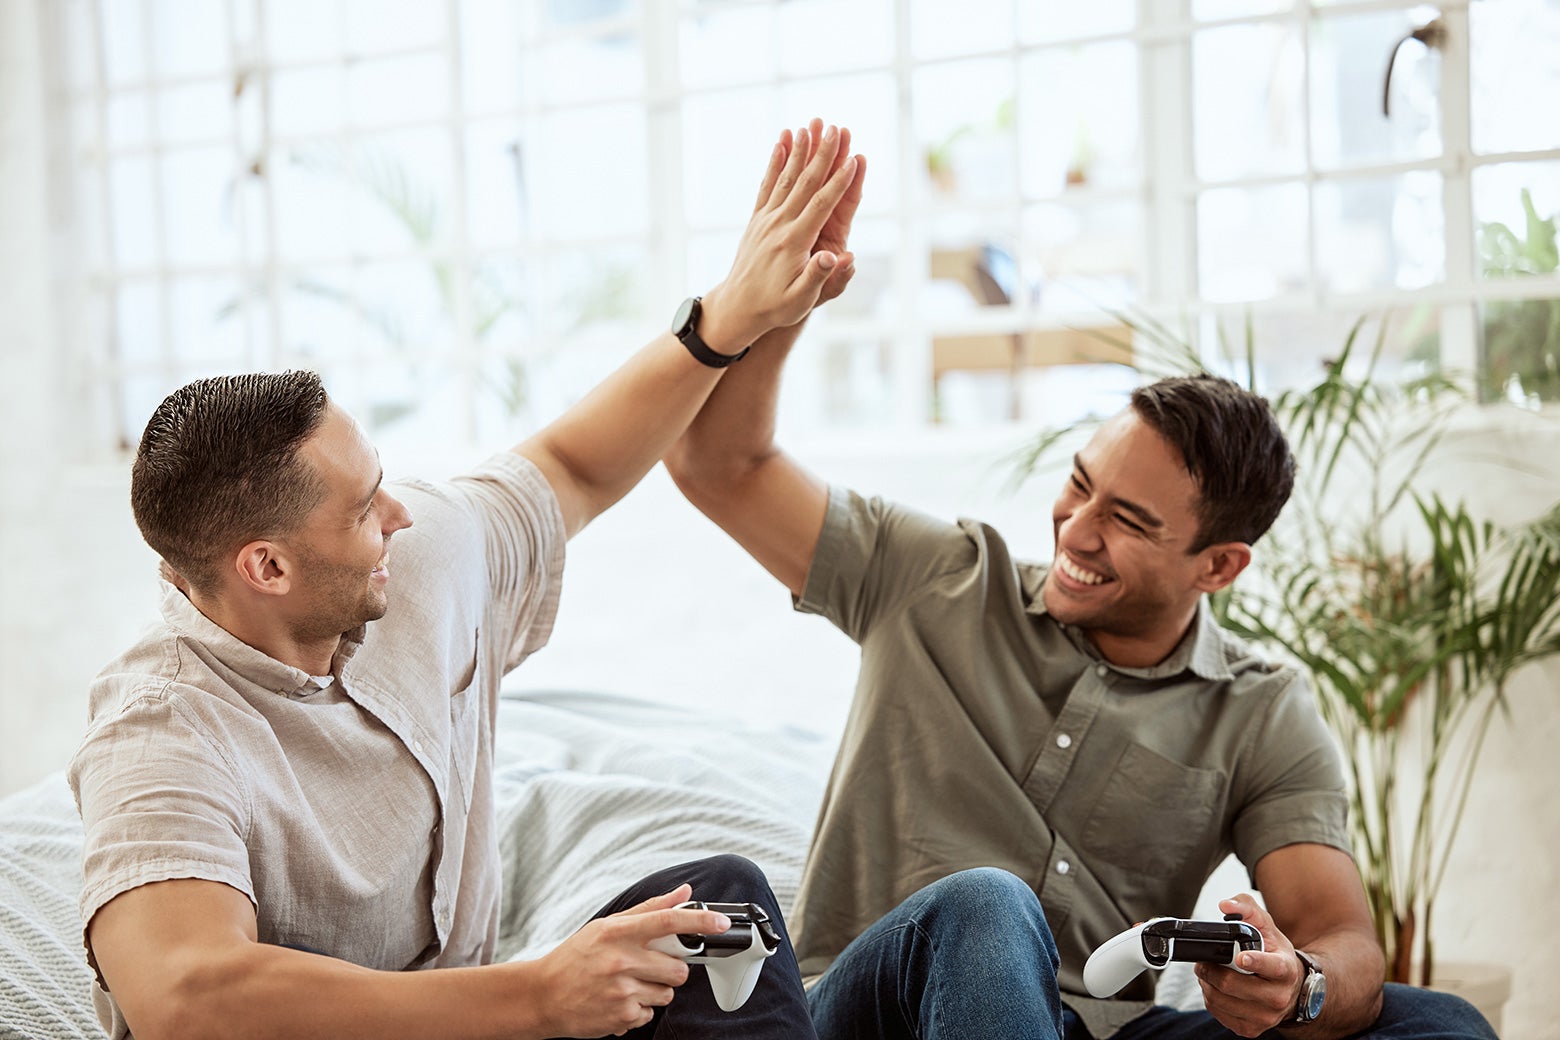 A New Video Game Has Millennial Bros Reliving Their Glory Days With the Boys